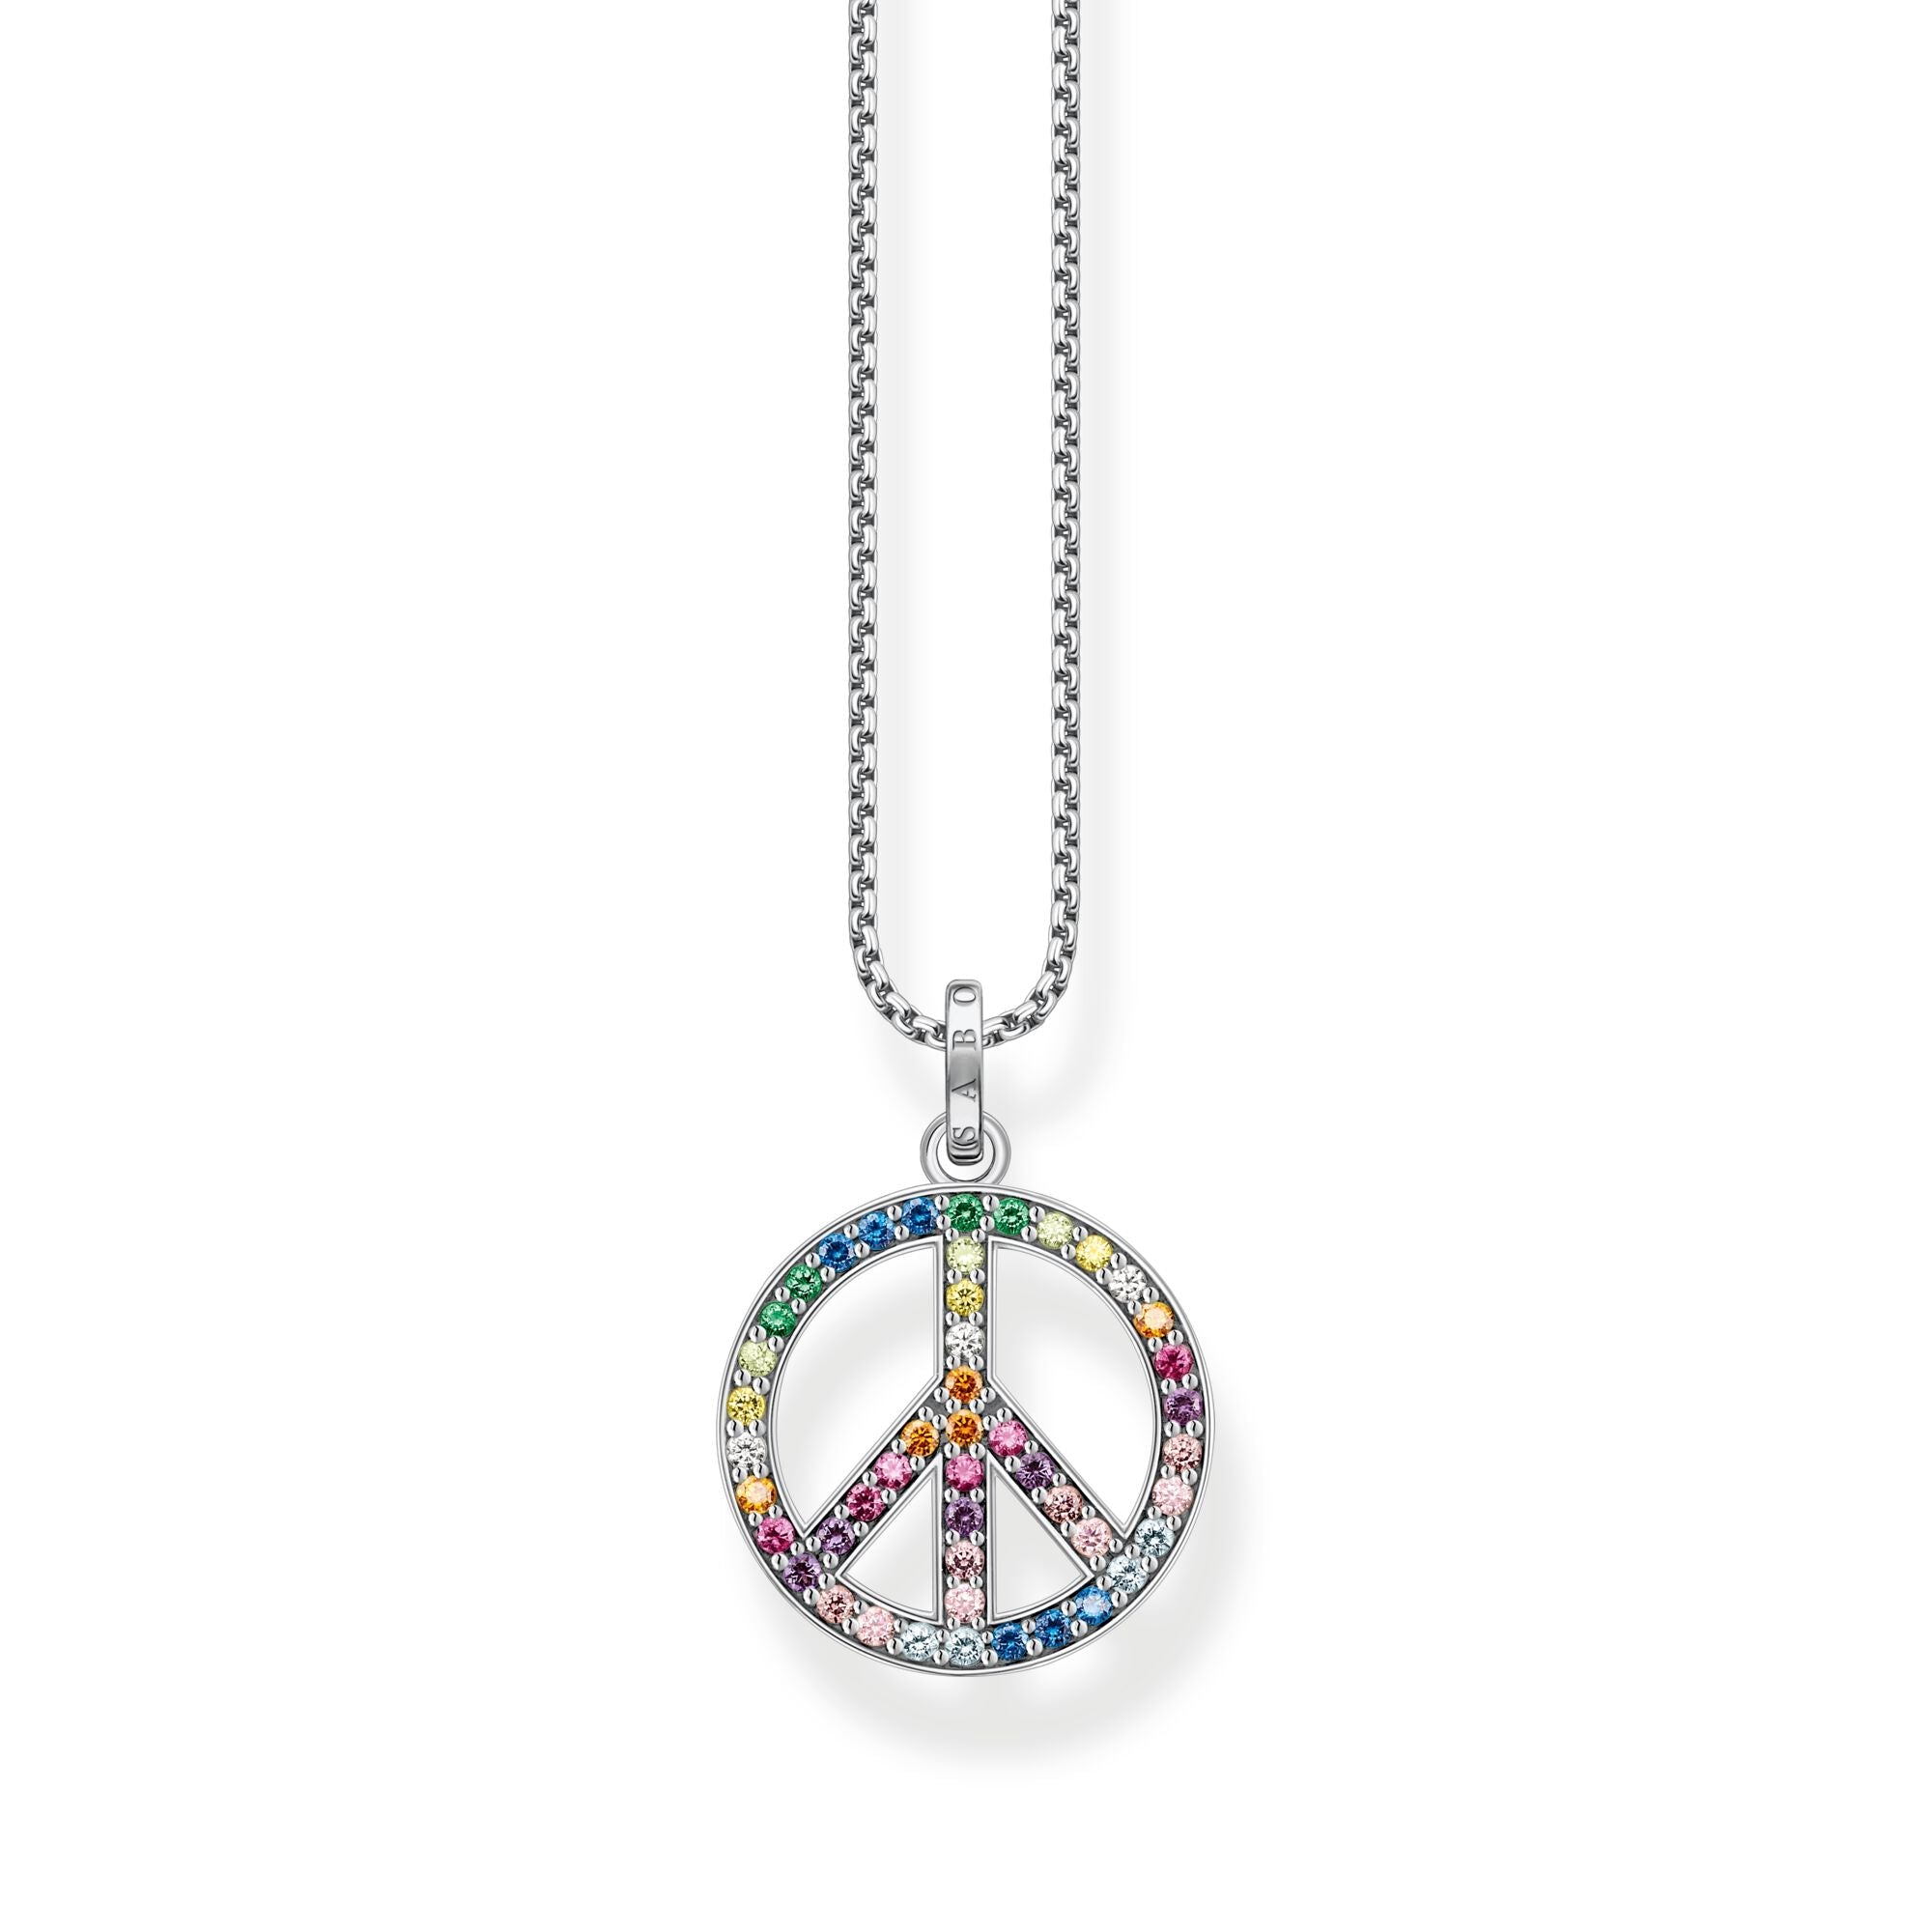 THOMAS SABO Necklace with Pendant Peace-Sign Silver Blackened